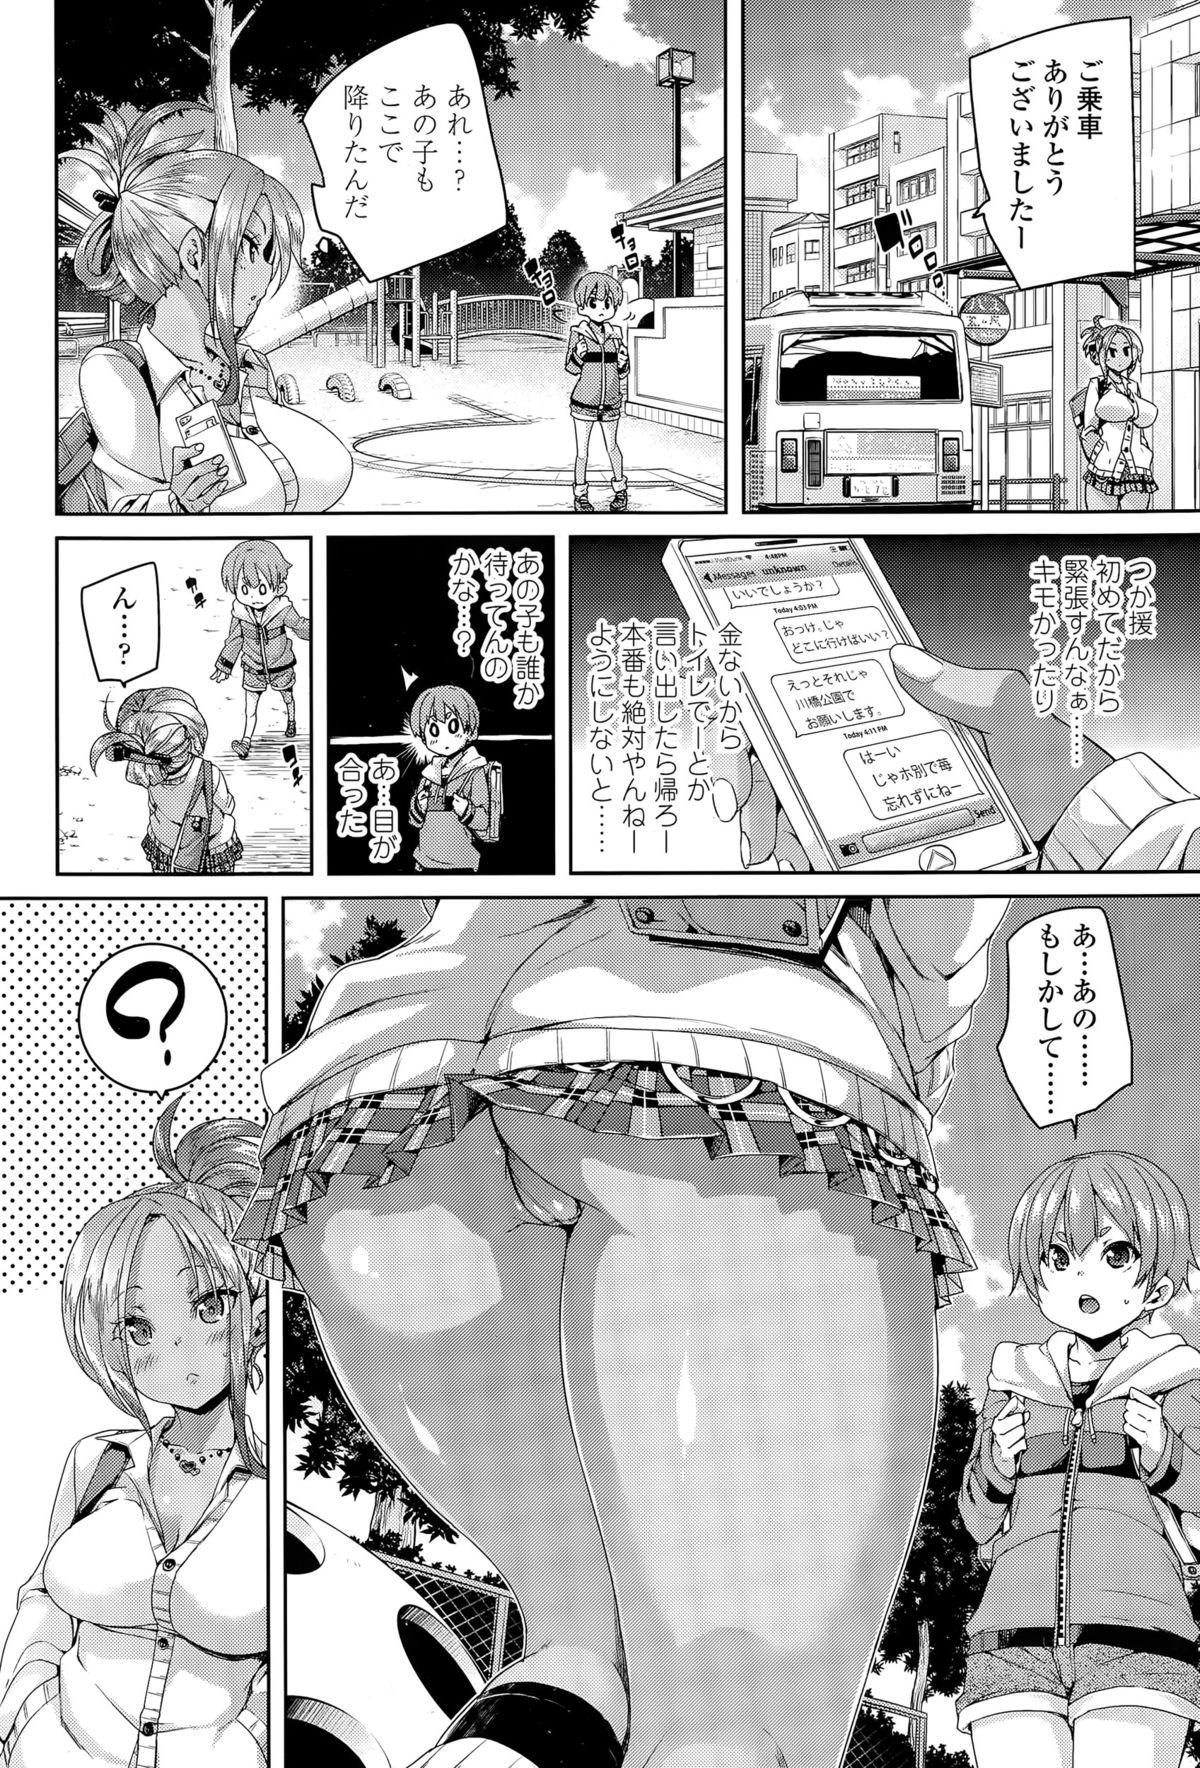 Pierced Girls forM Vol. 09 Brother - Page 6